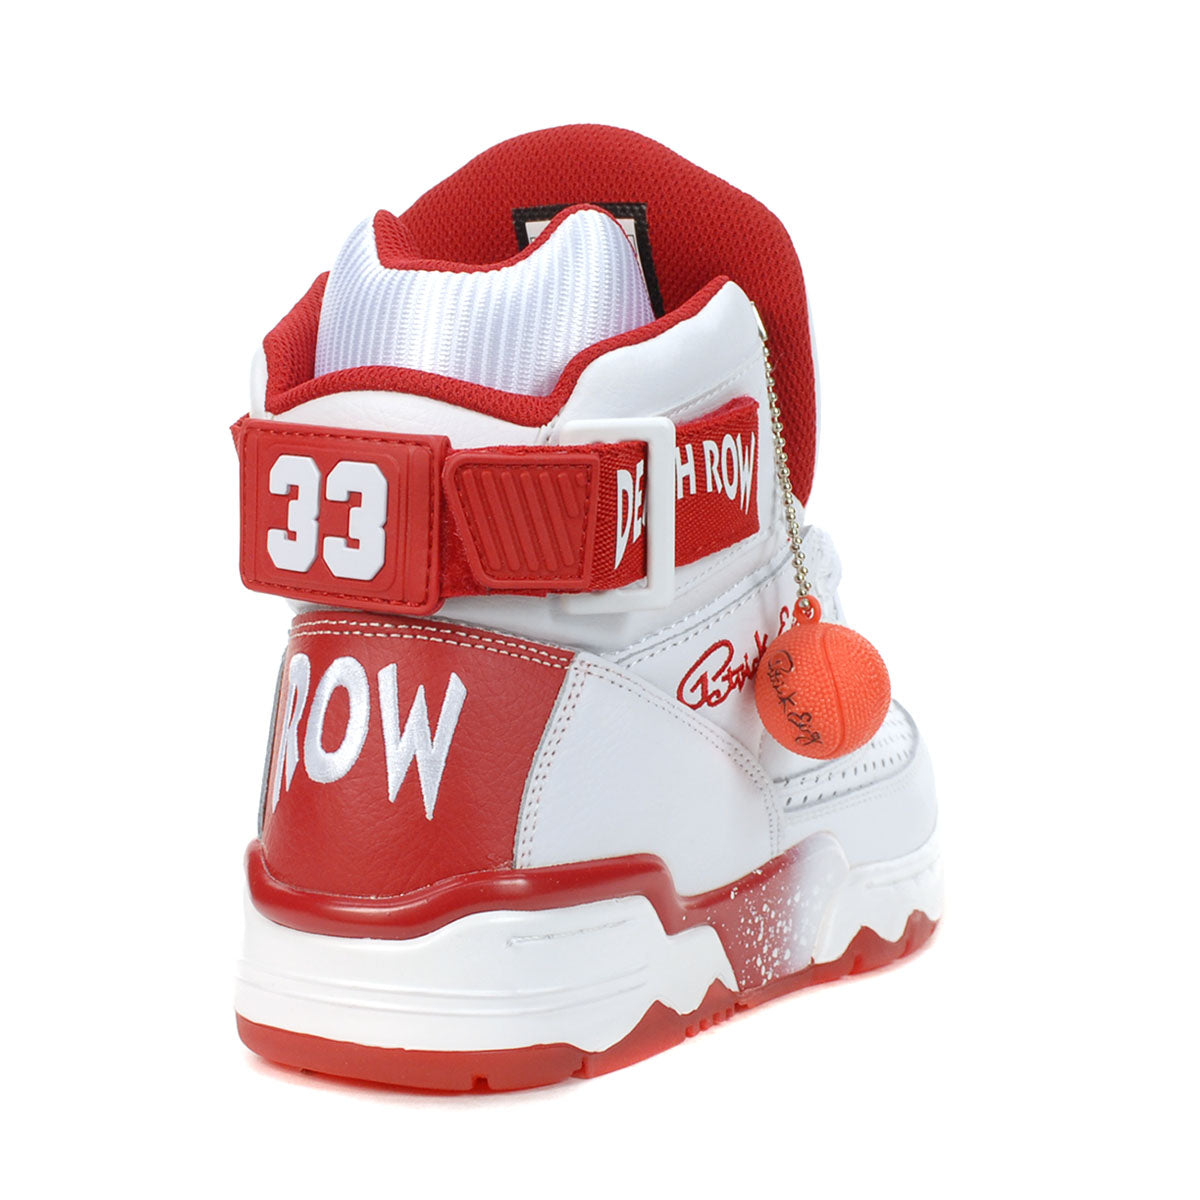 33 HI X DEATH ROW RECORDS WHITE/RED